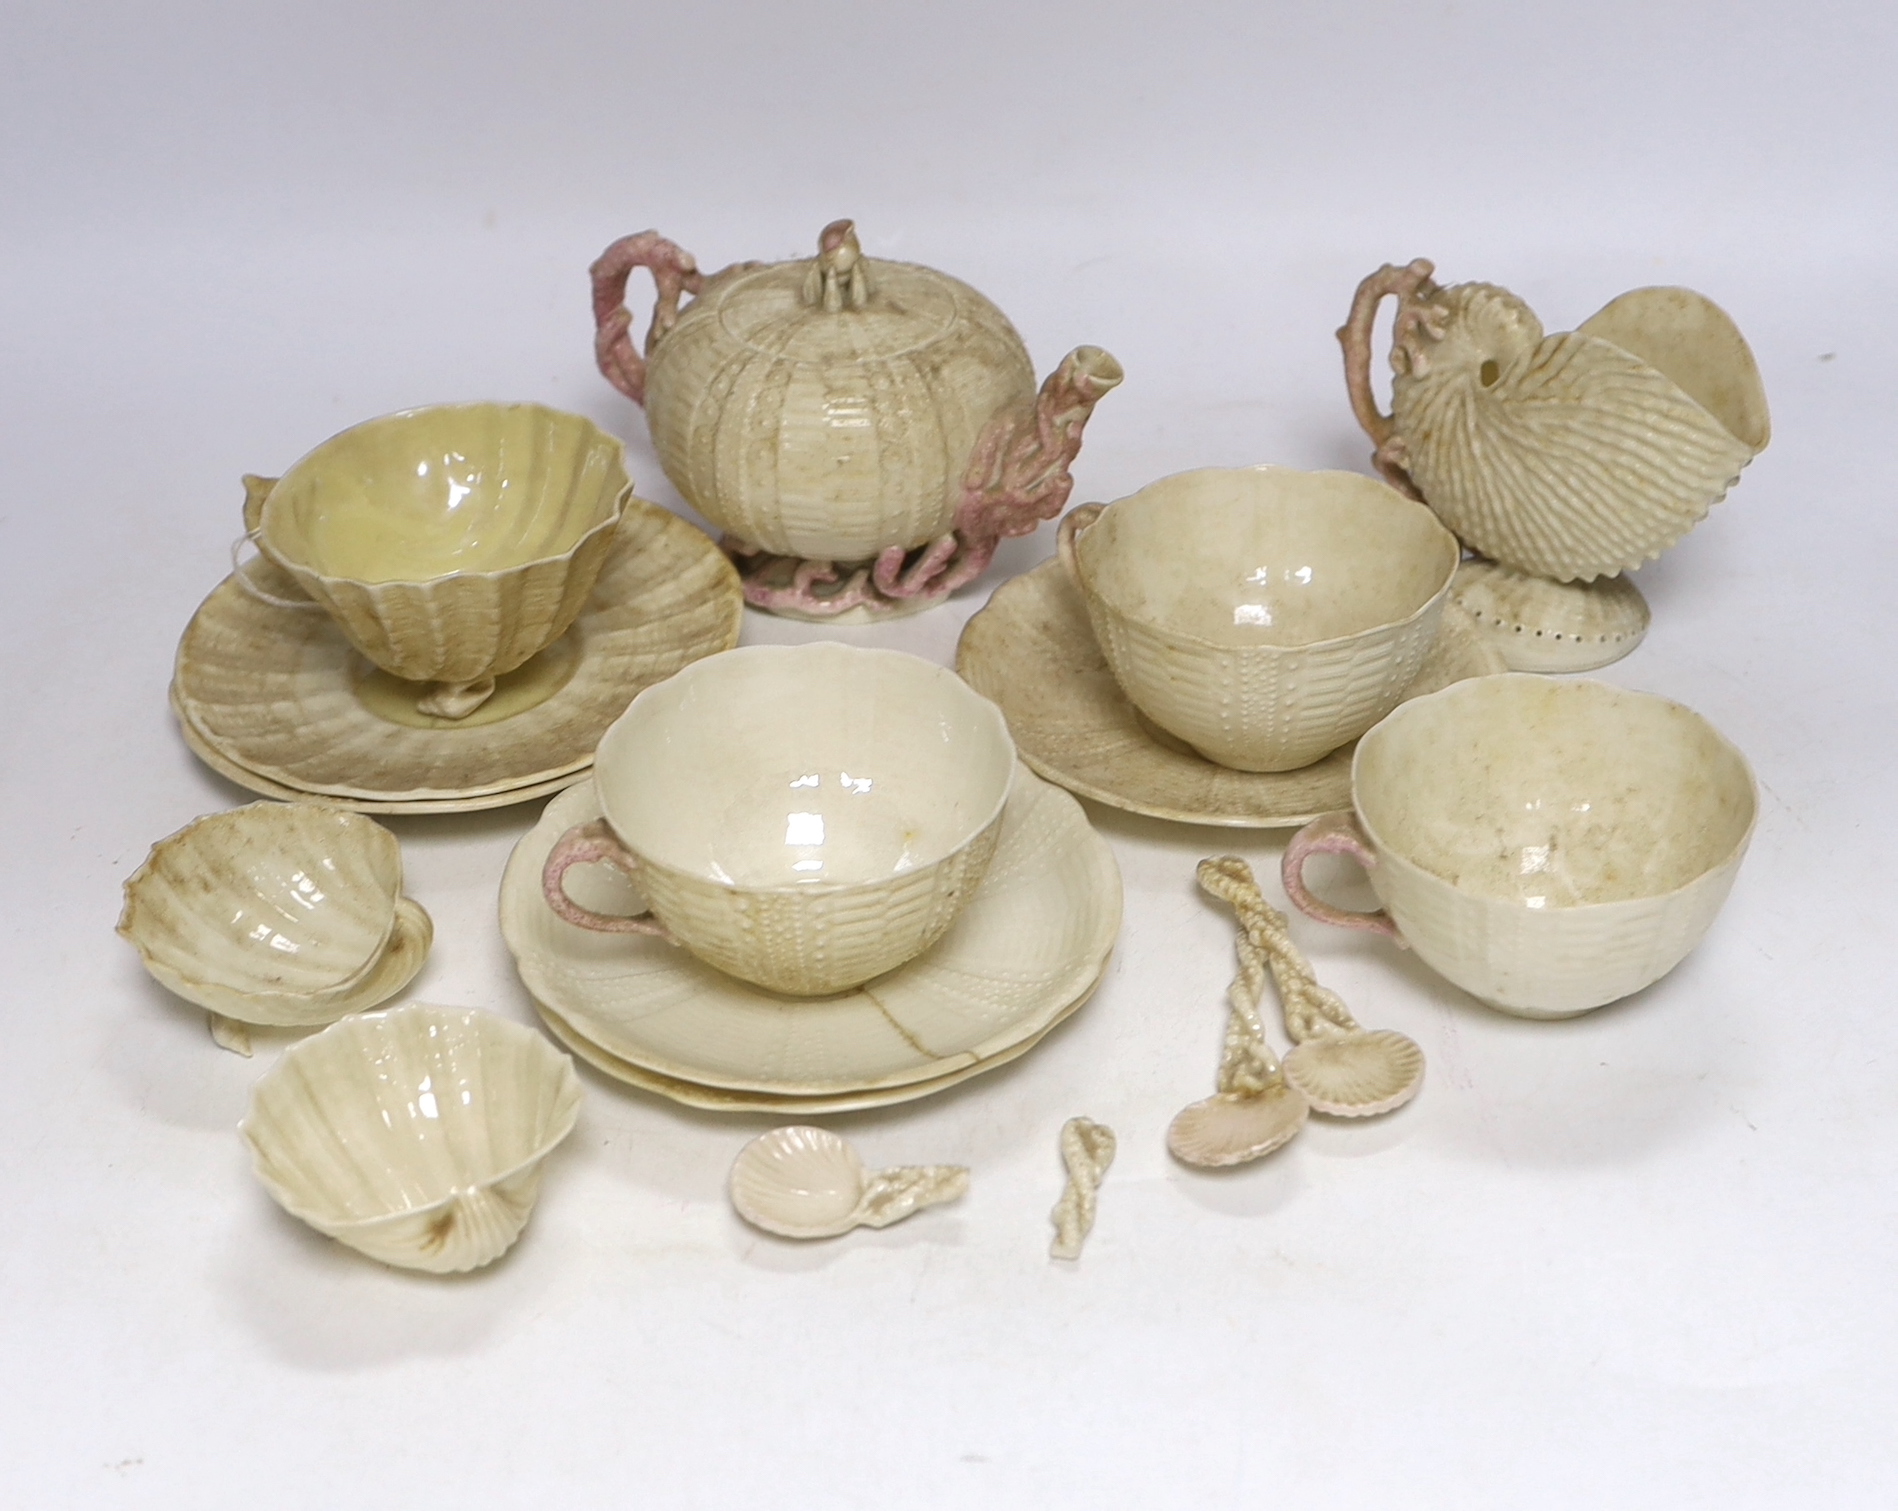 A quantity of Belleek including a teapot, three cups and saucers and a shell design vase, mostly first period